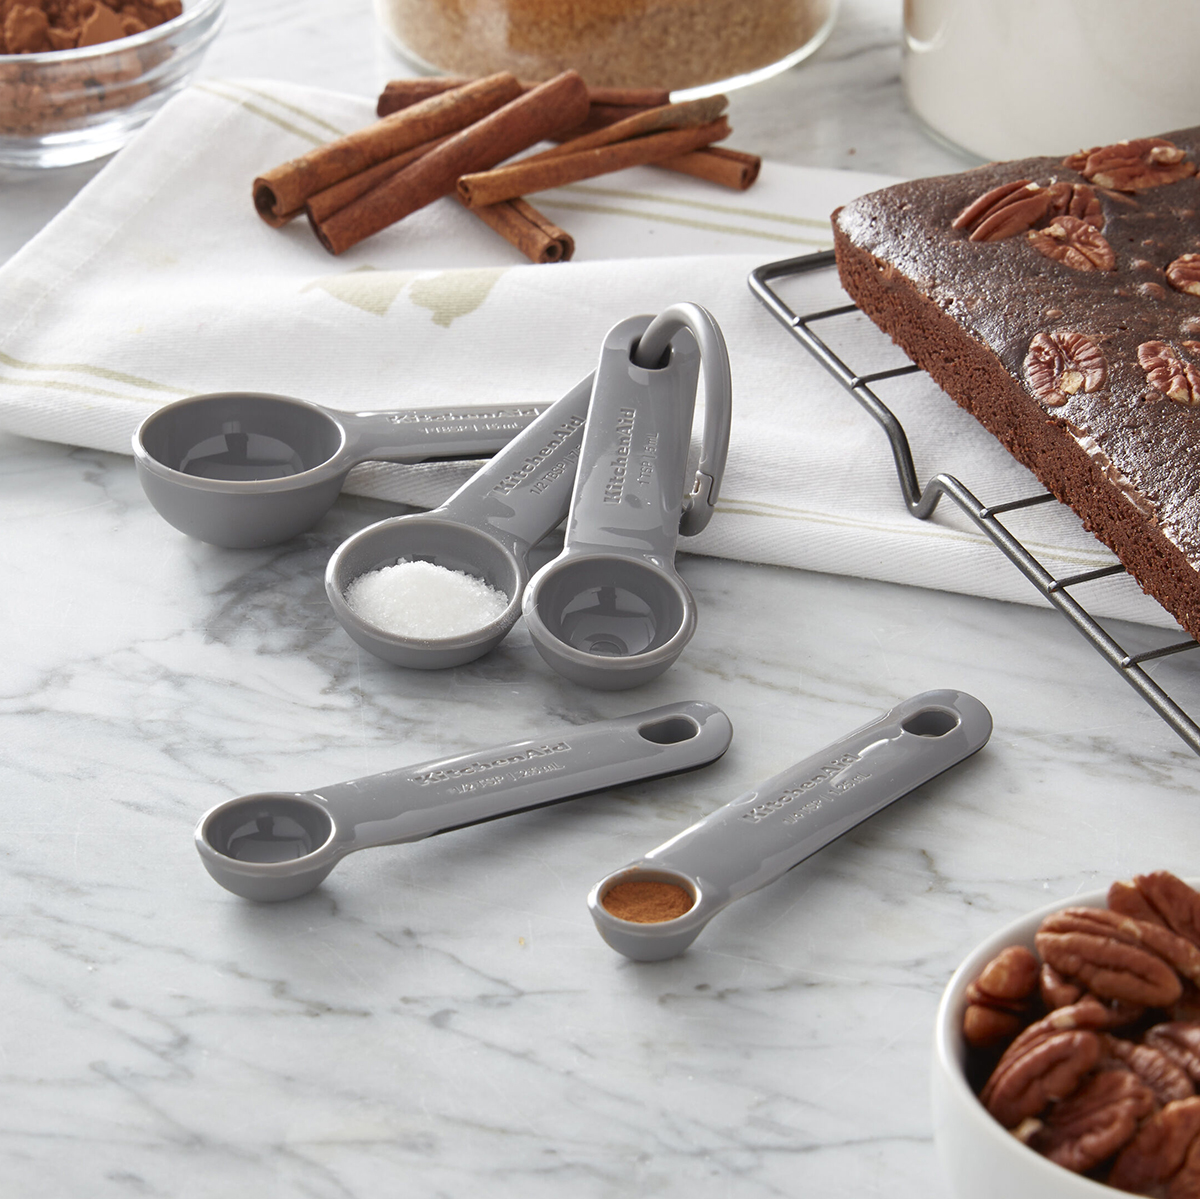 https://www.containerstore.com/catalogimages/427131/10085964-KitchenAid-Measuring-Spoon-.jpg